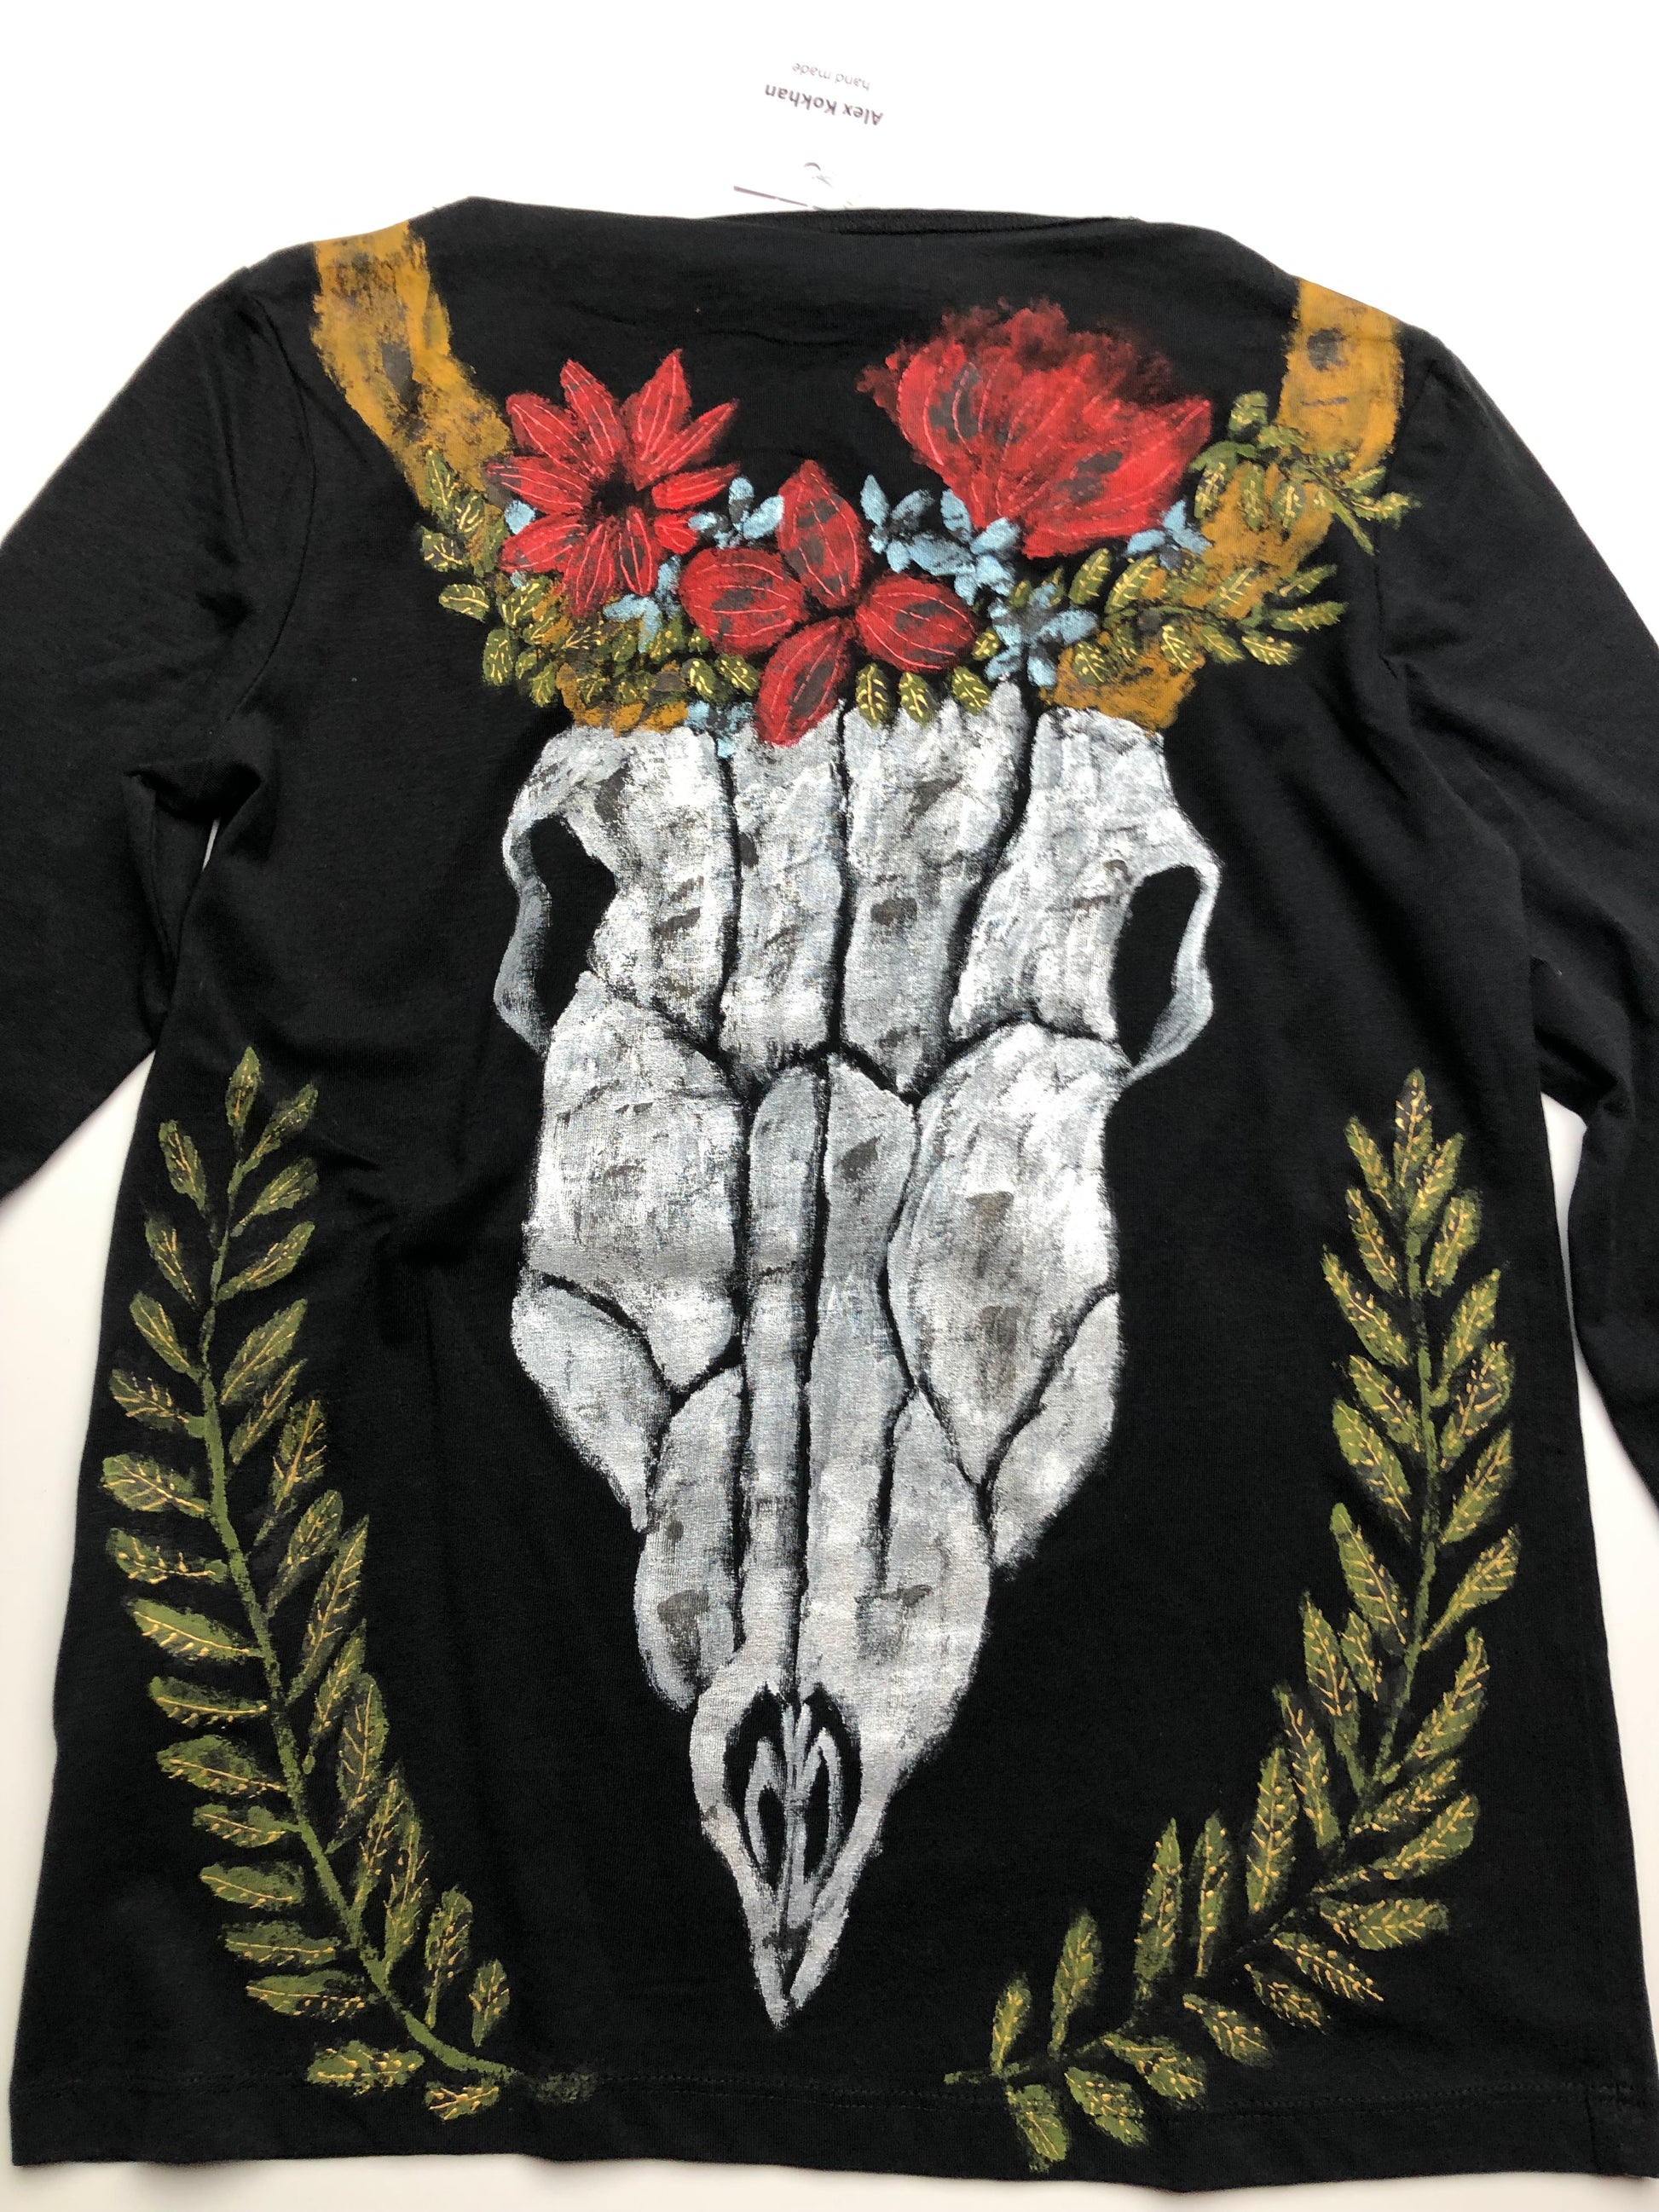 Luxury Women's long sleeve black T-shirt with a pattern of a skull, horns, leaves and flowers. Skull Blouse for Ladies